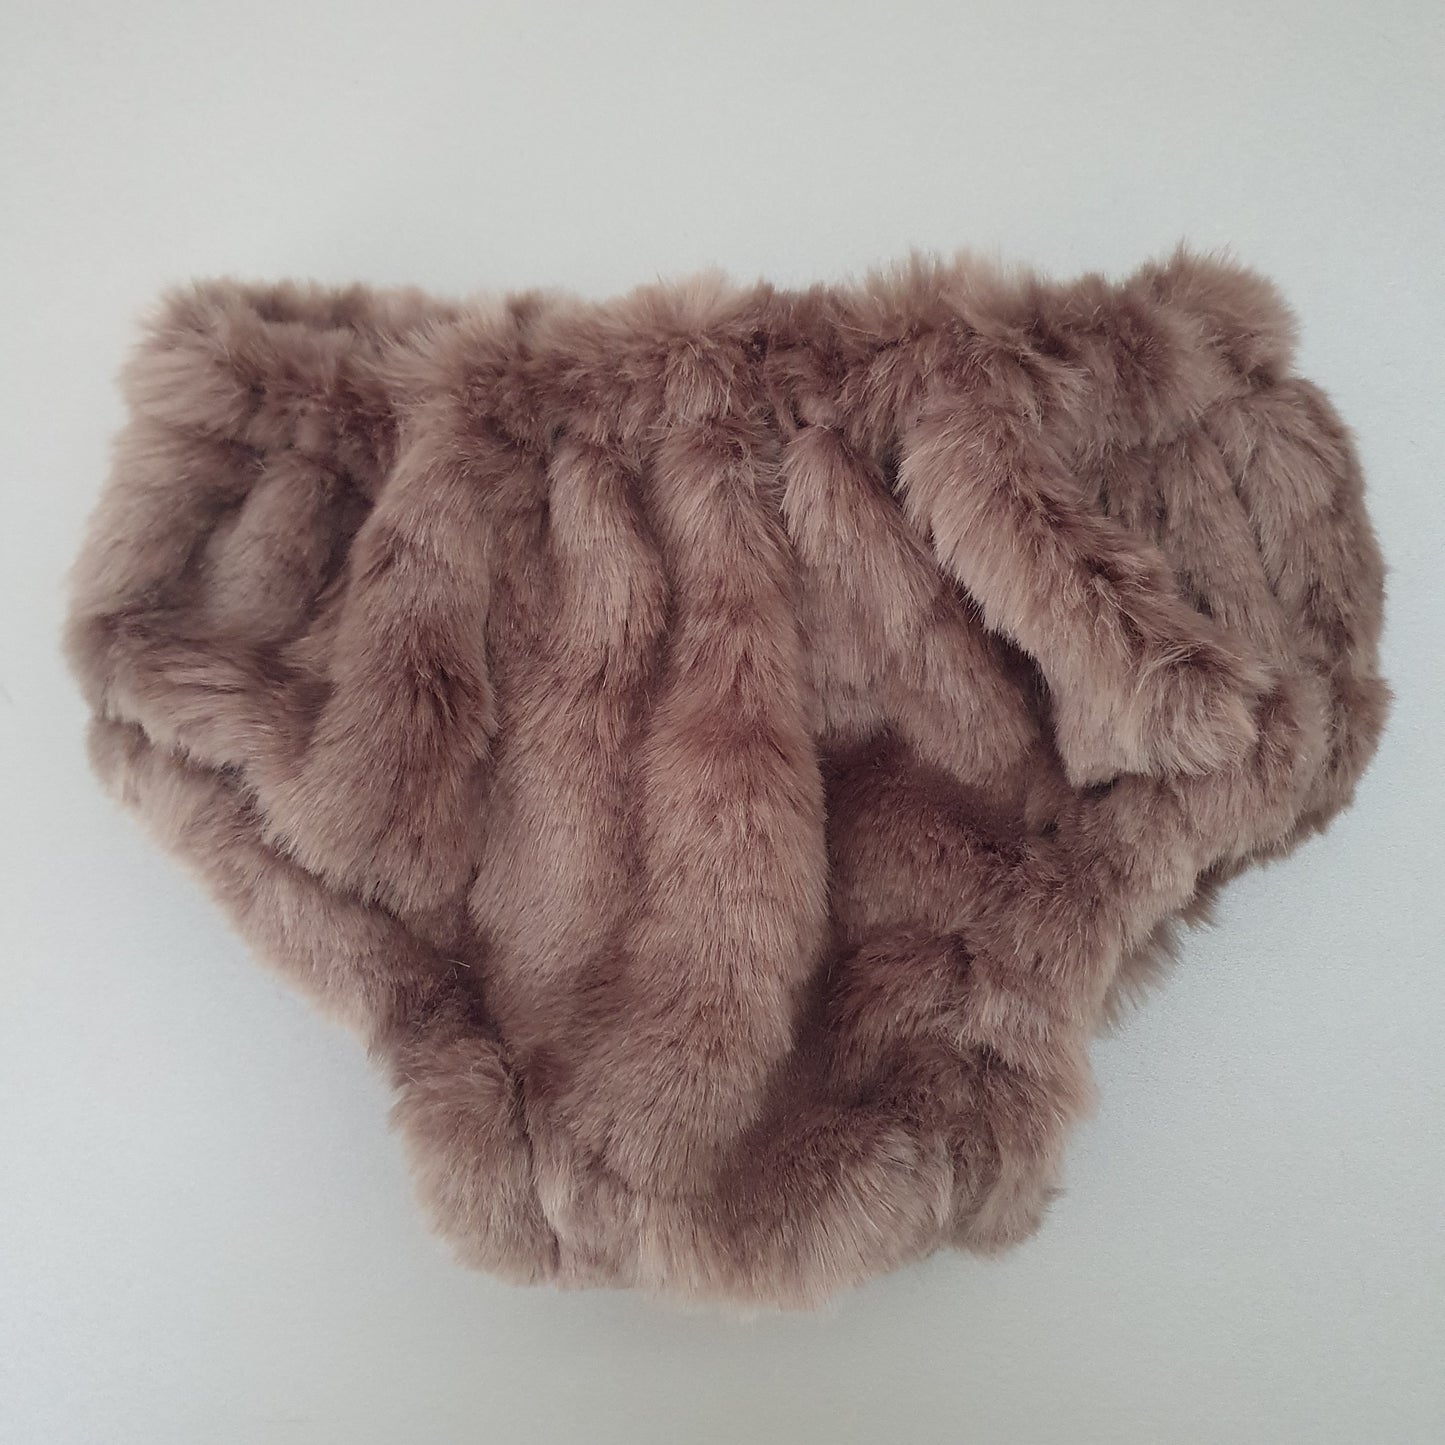 FAUX FUR DELUXE - WOLF - Fake Animal Hair Baby Nappy Cover, Size 1 (12-24 months)